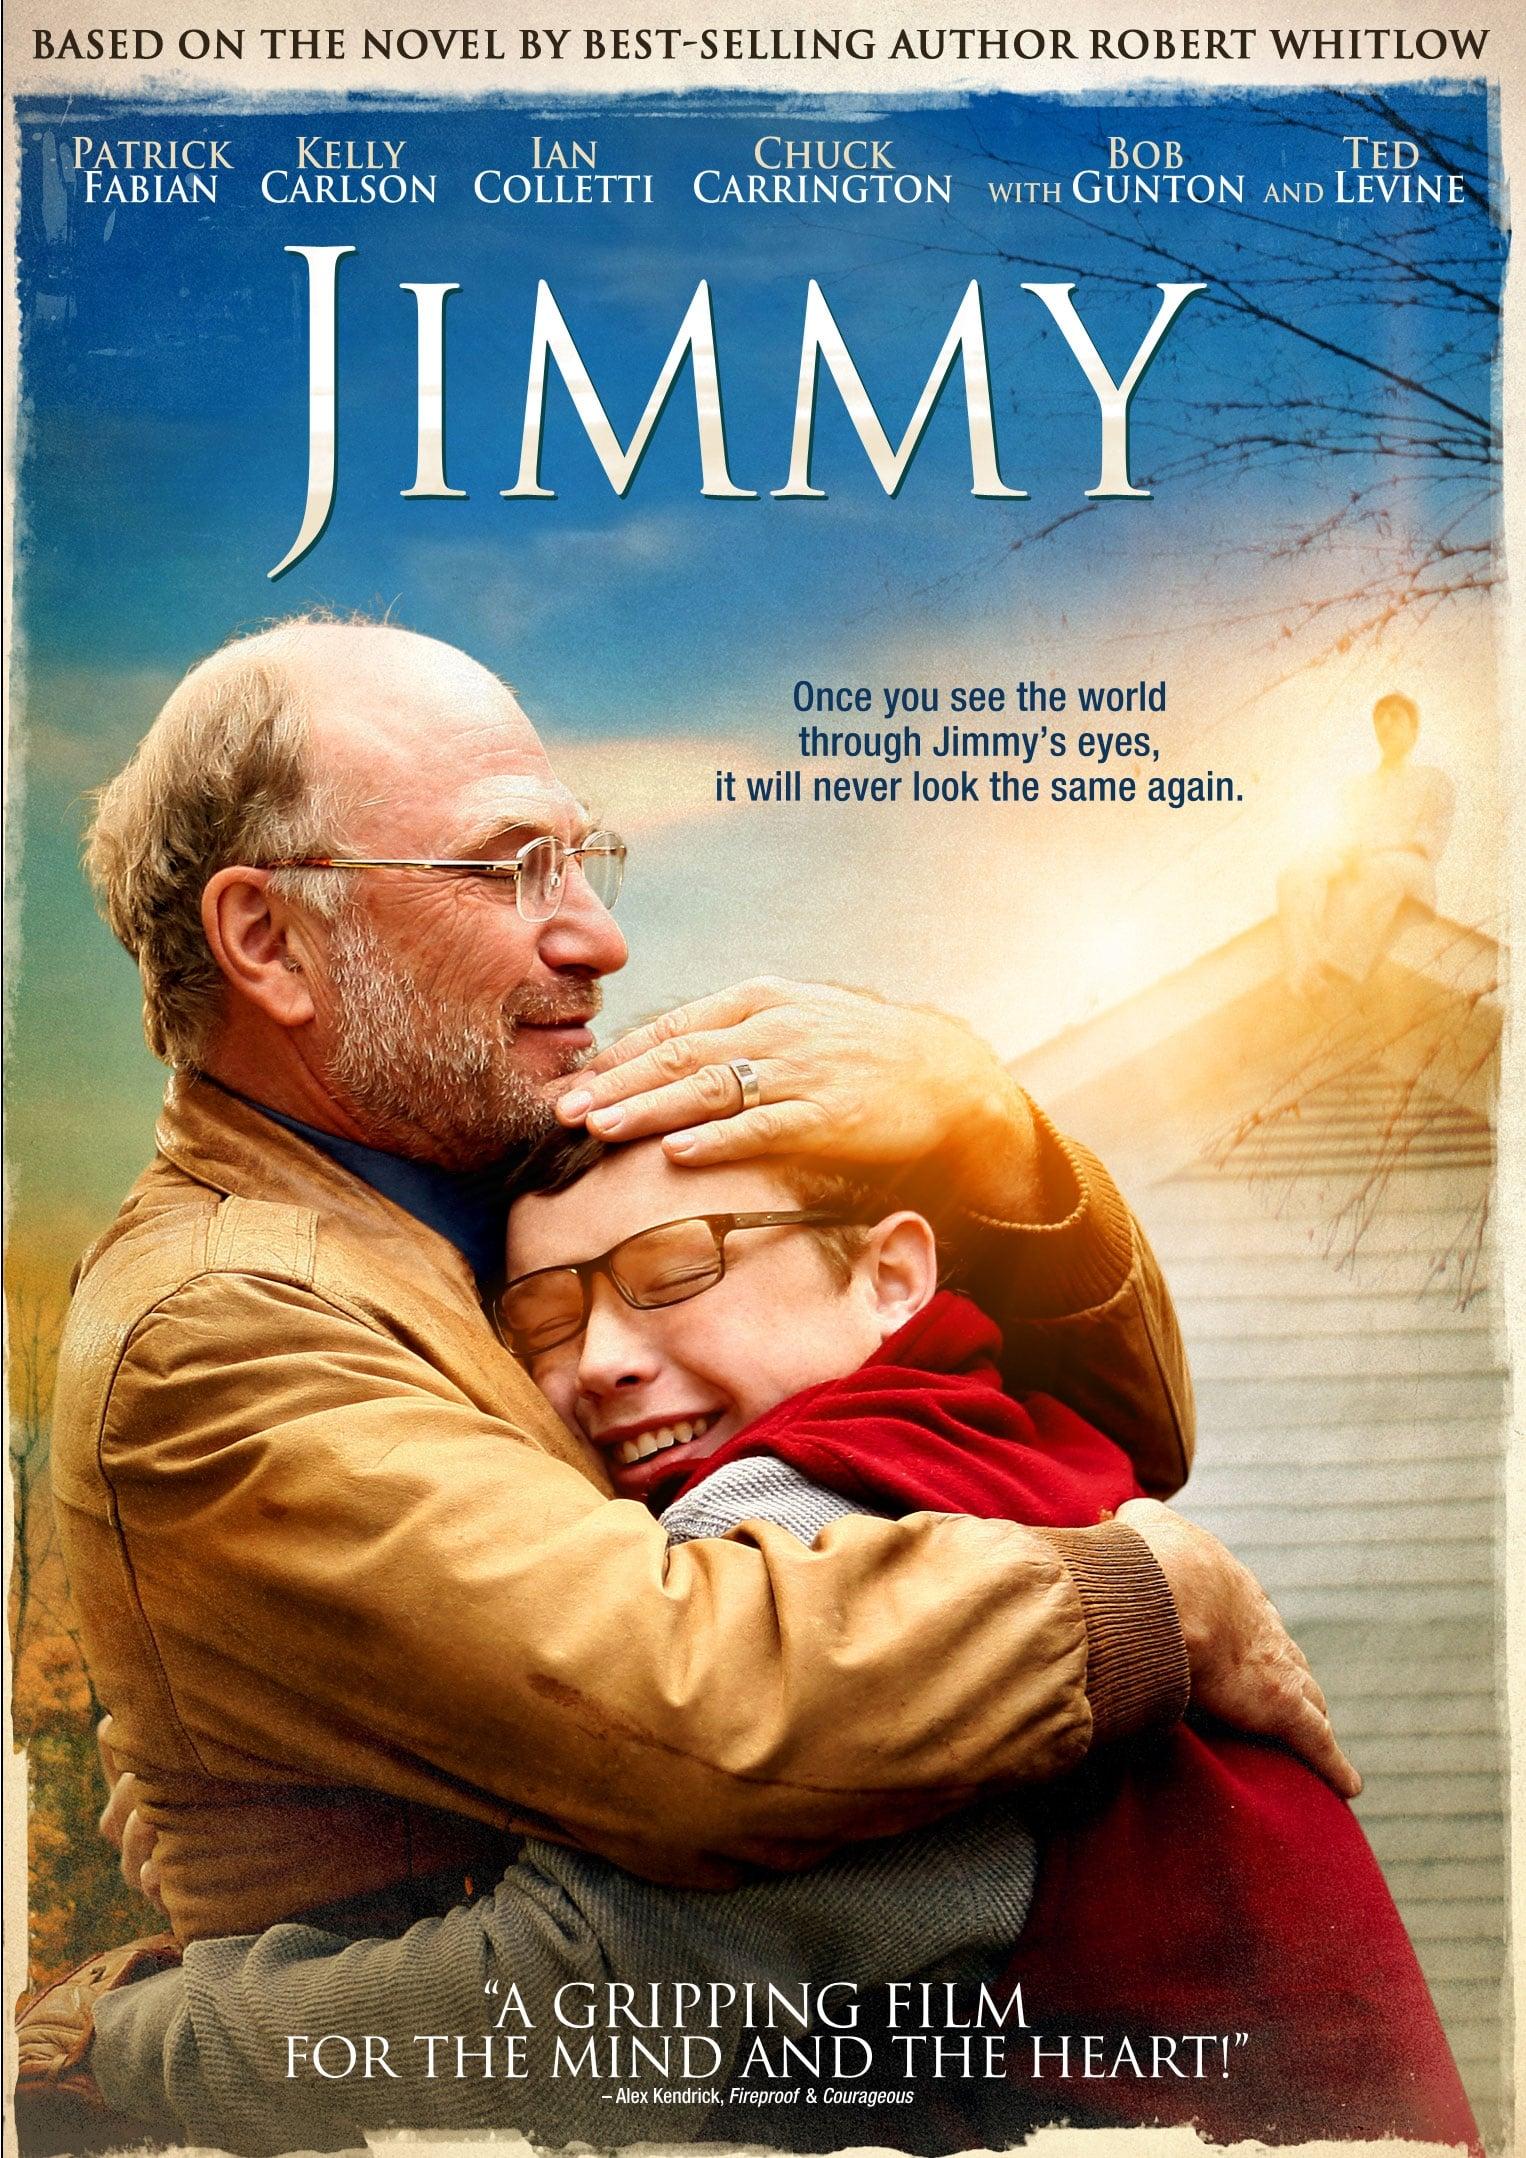 Jimmy poster